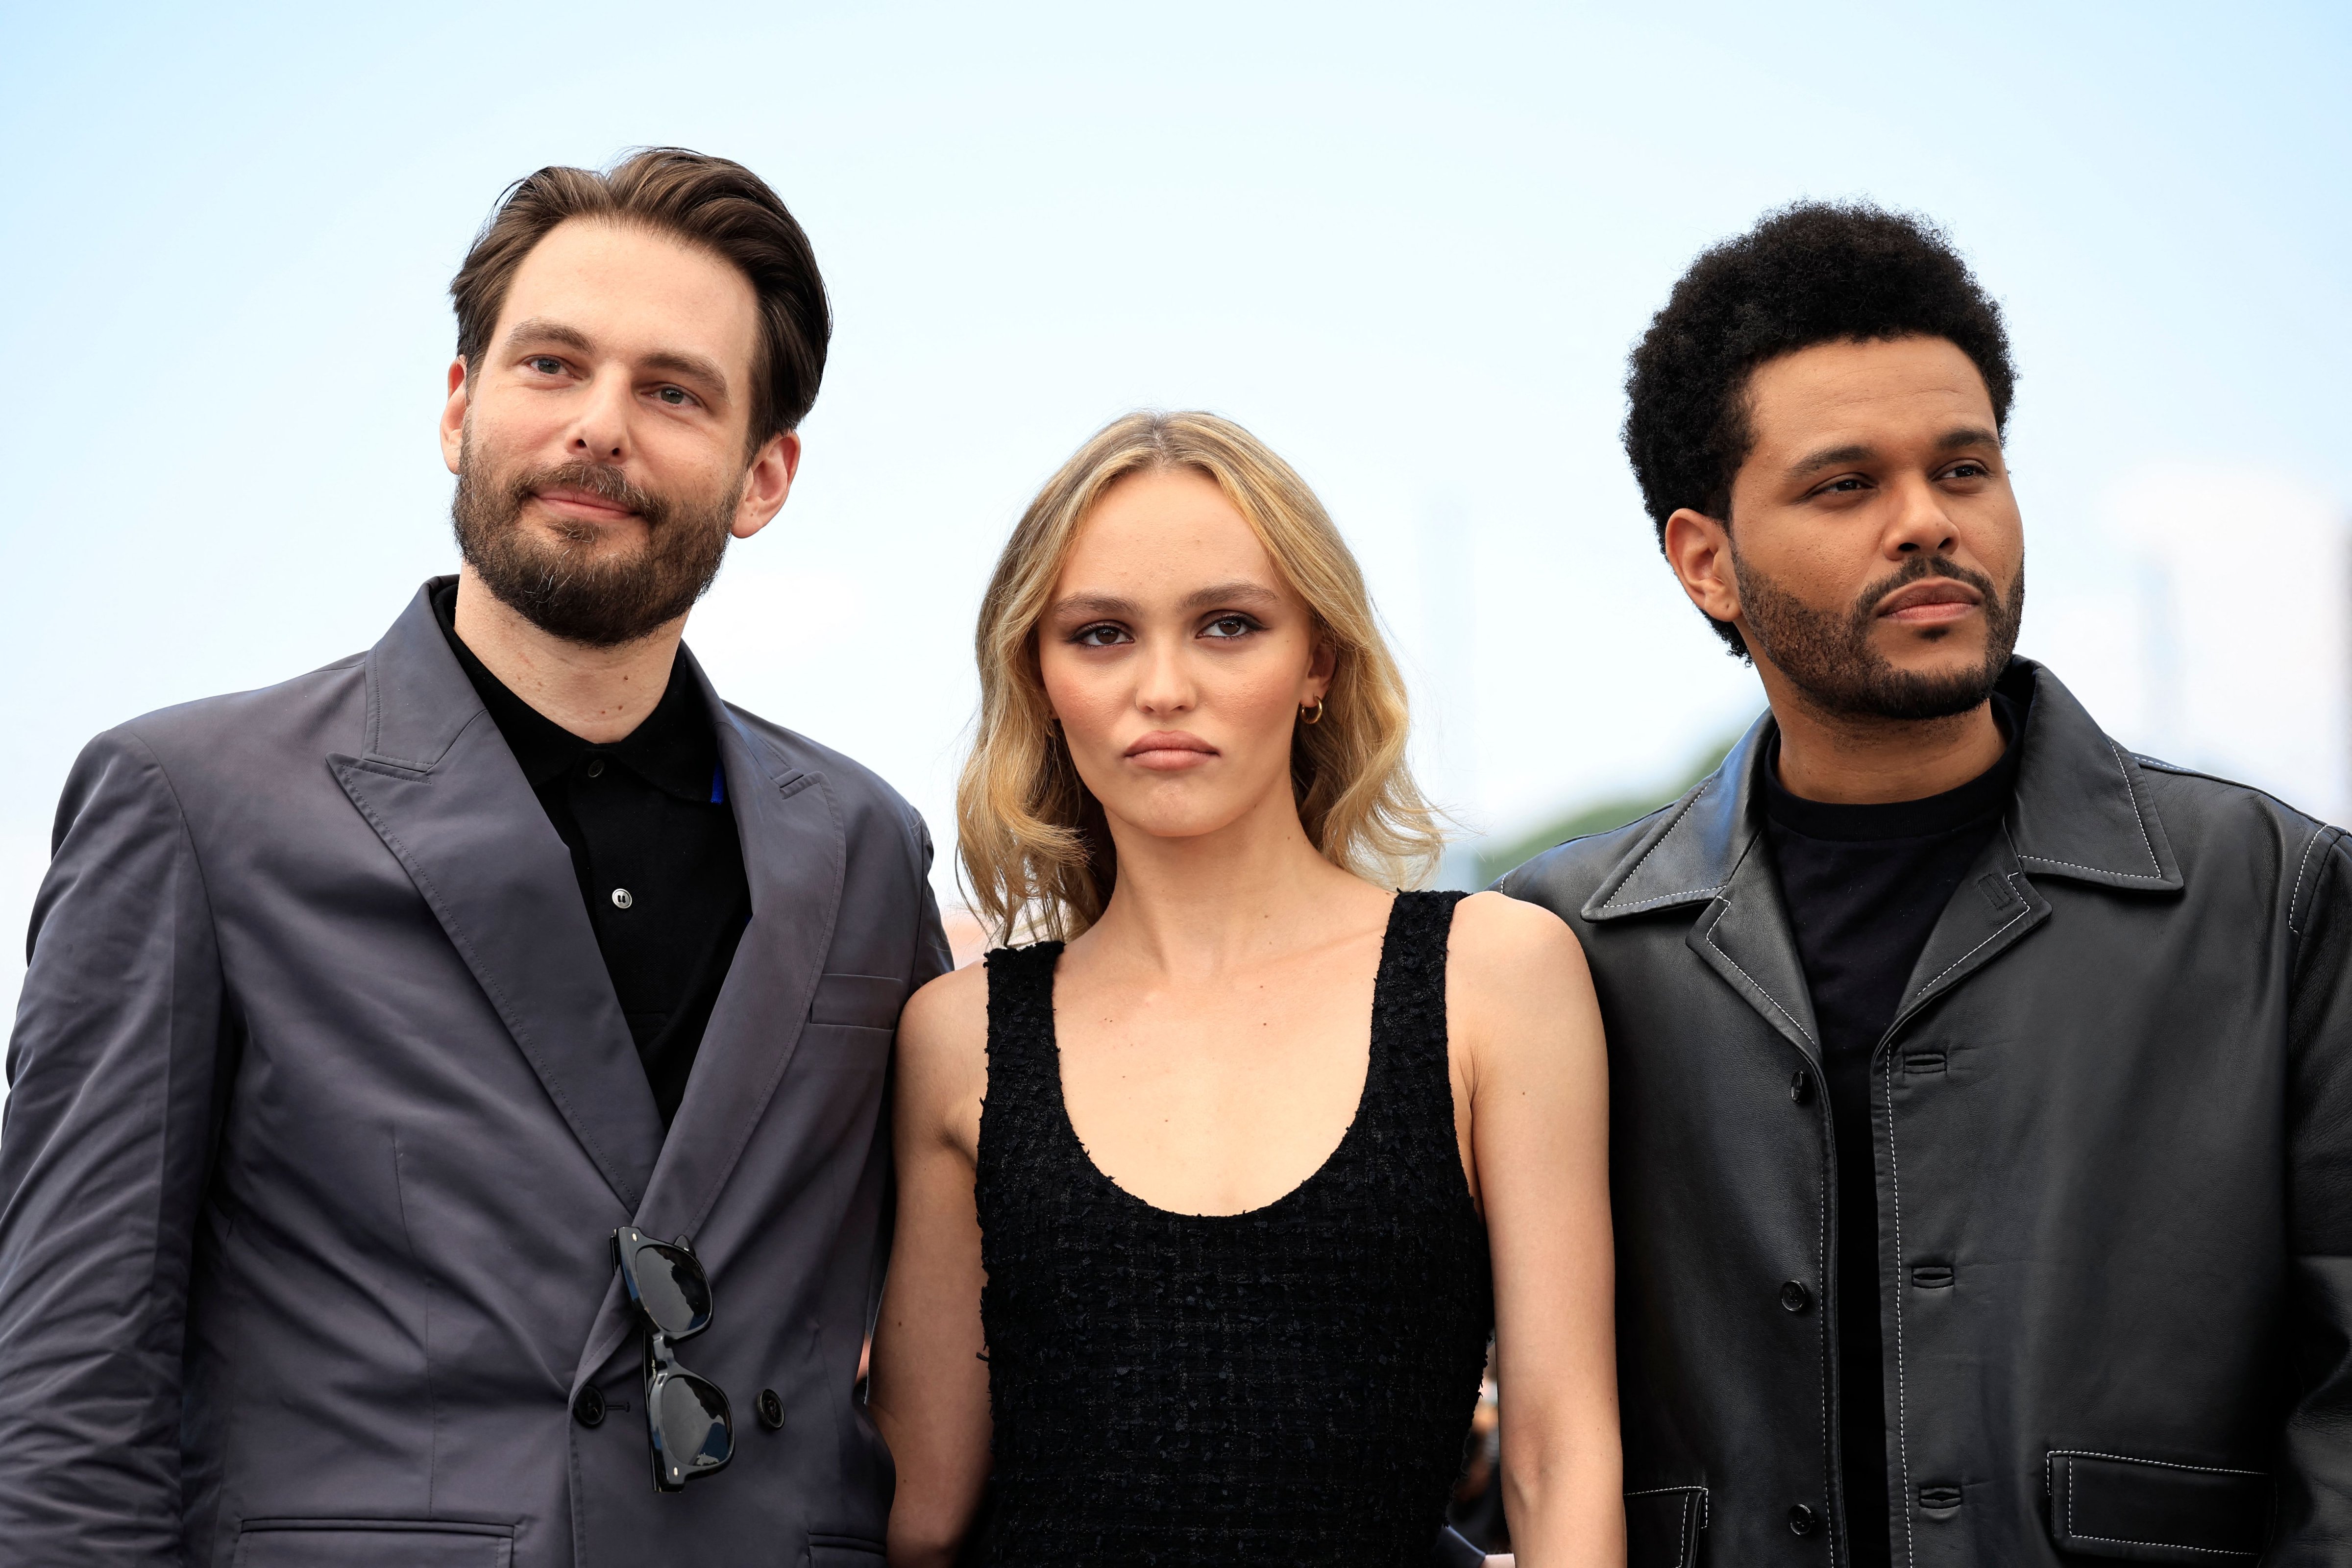 (From L) US director Sam Levinson, French-US actress Lily-Rose Depp and Canadian singer Abel Makkonen Tesfaye aka The Weeknd at the 76th edition of the Cannes Film Festival. (Photo by Valery HACHE / AFP))